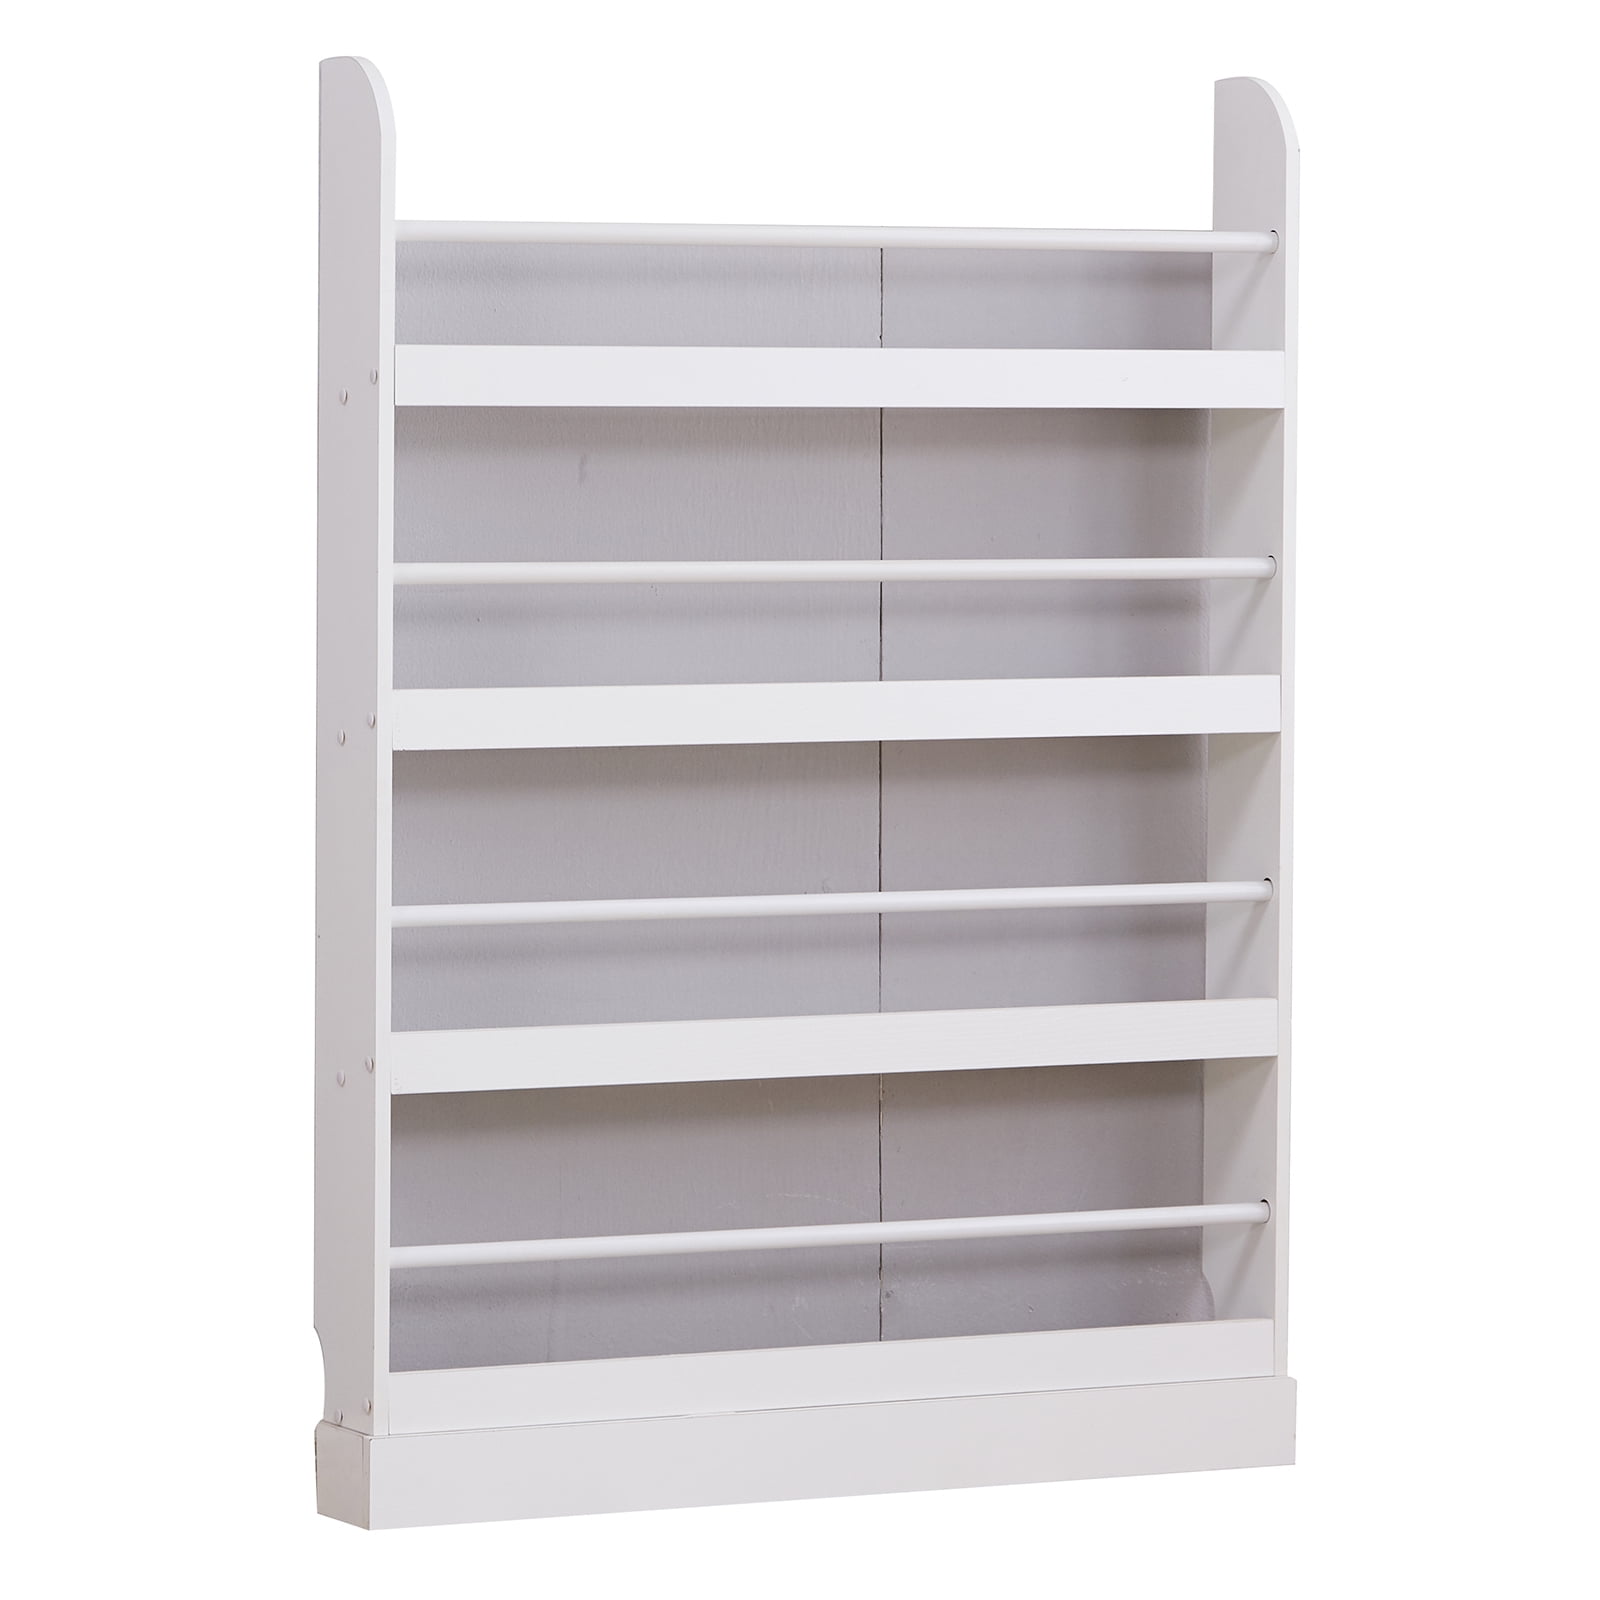 4 Tier Childrens Bookcase Rack Free Standing Against The Wall Display Storage Shelves for Books Toys in Study Living Room Bedroom White 31.5 L x 4.5 W x 46.5 H Homfa Kids Bookshelf 